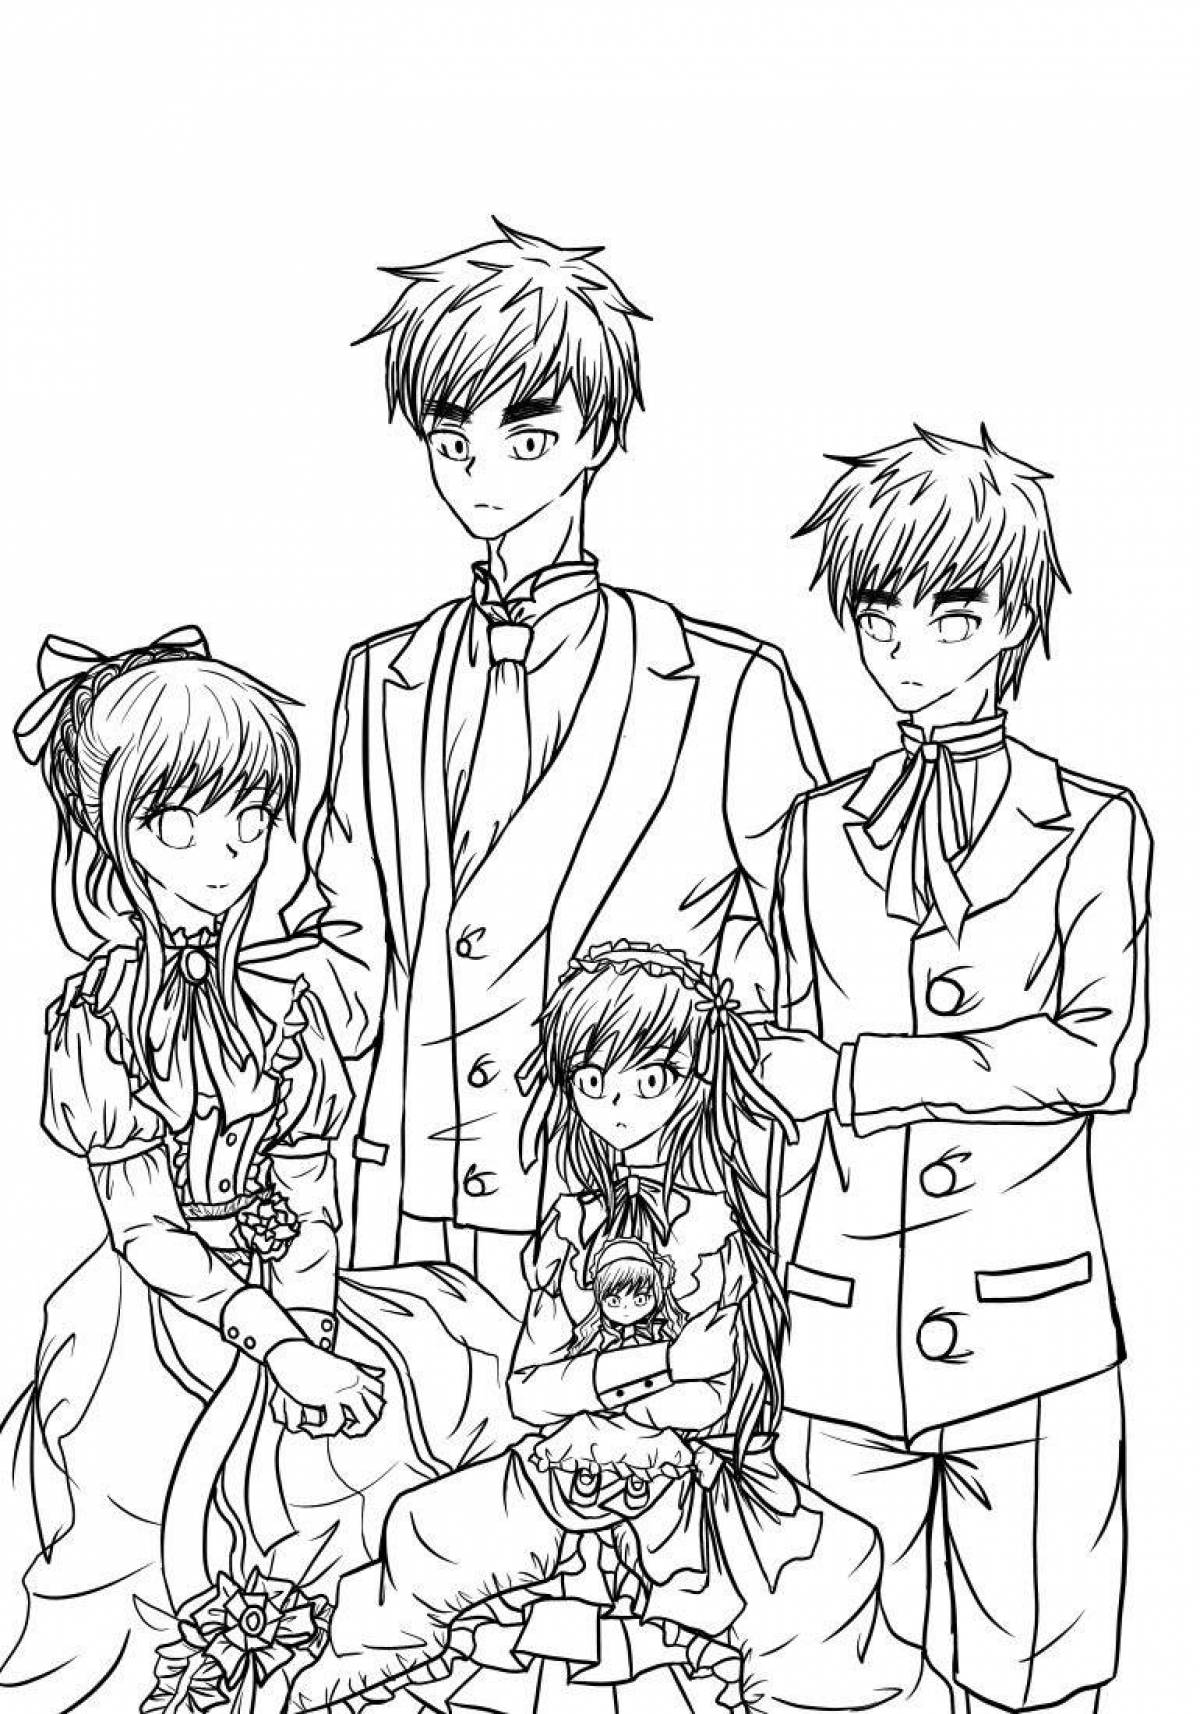 Awesome spy family coloring page